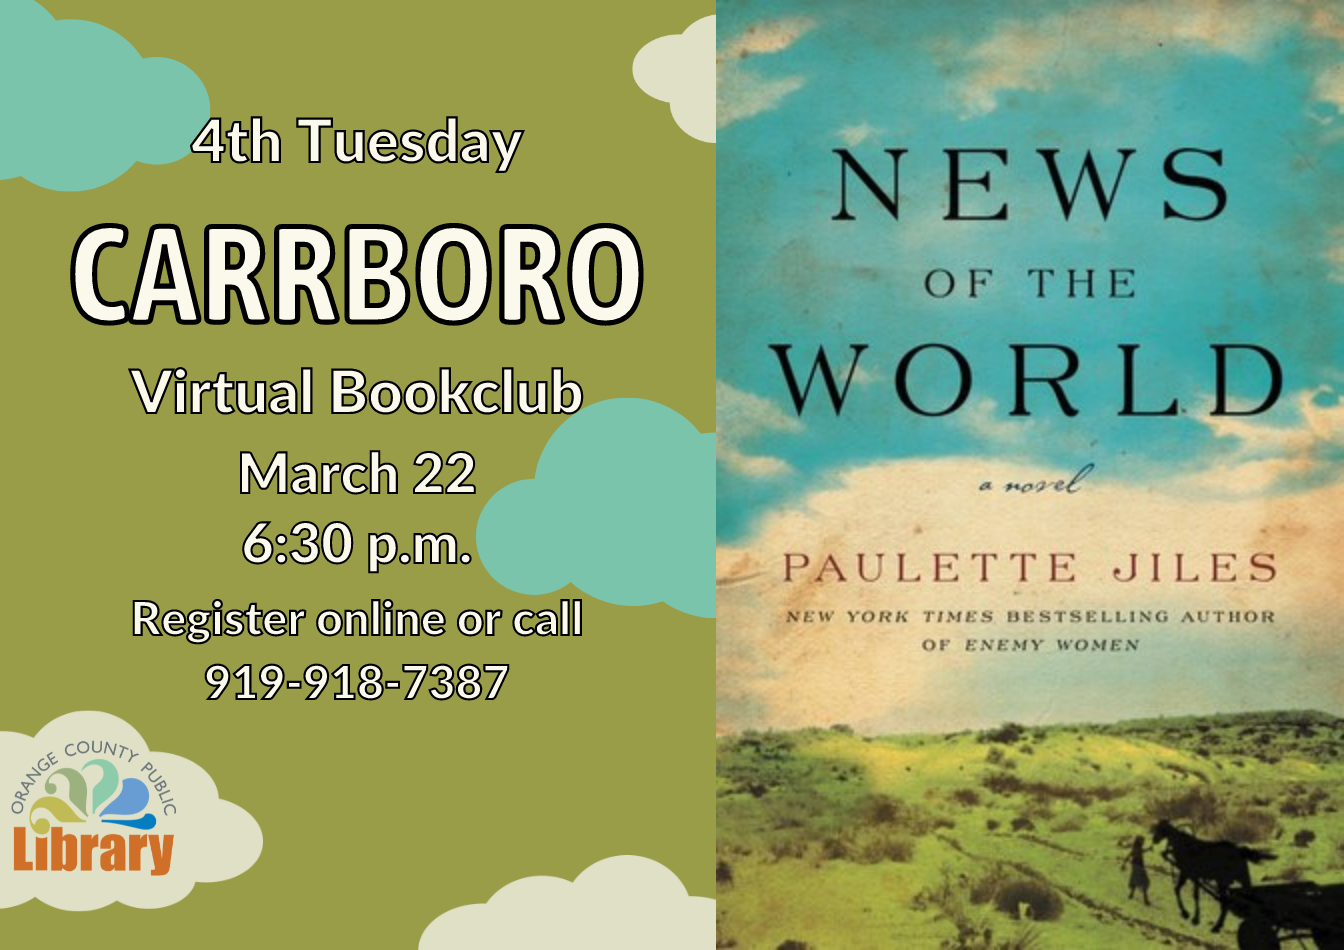 A green flyer with the cover of this month's book, News of the World by Paulette Jiles. Flyer text: Fourth Tuesday Carrboro Virtual Bookclub. March 22, 6:30 PM. Register online or call 919-918-7387.